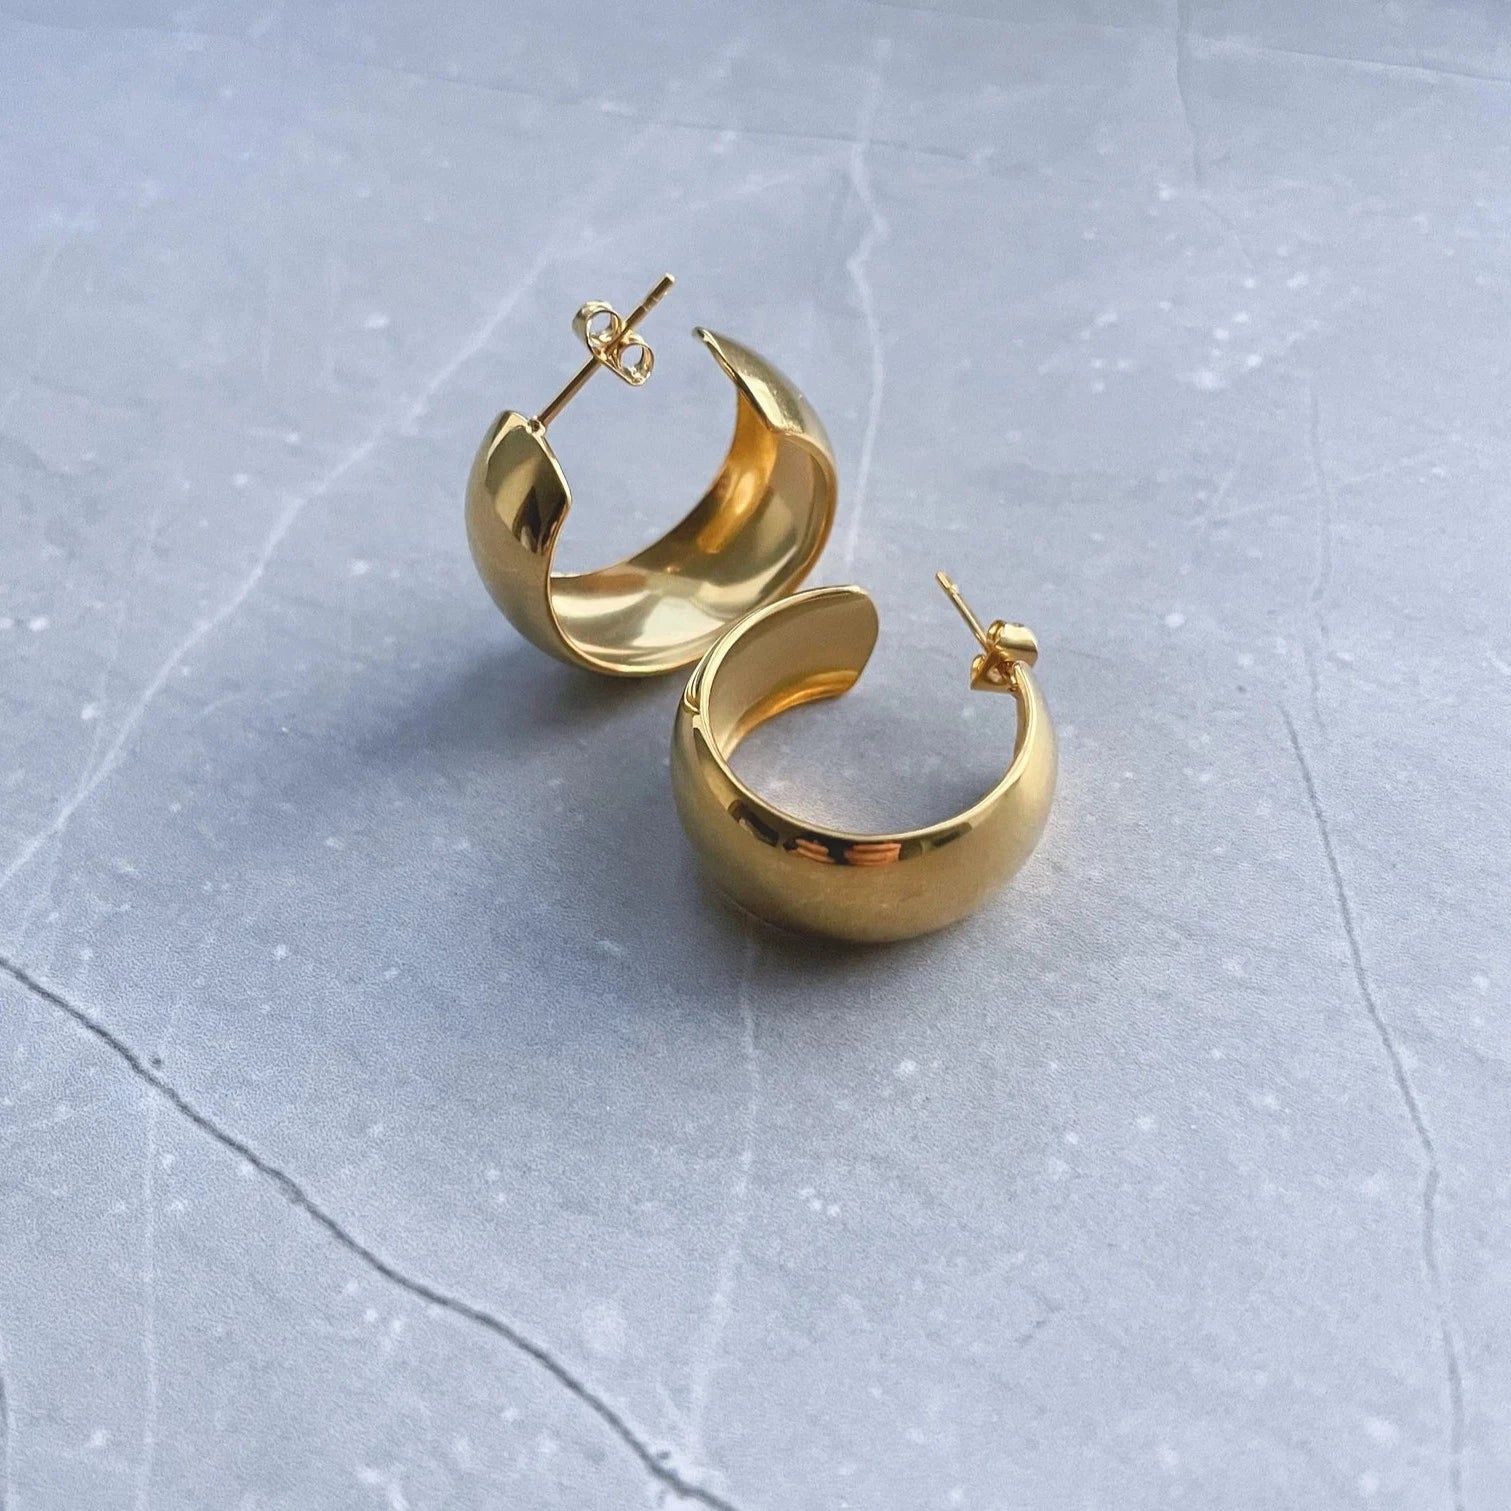 Trending Chunky Gold Hoops for Everyday Wear